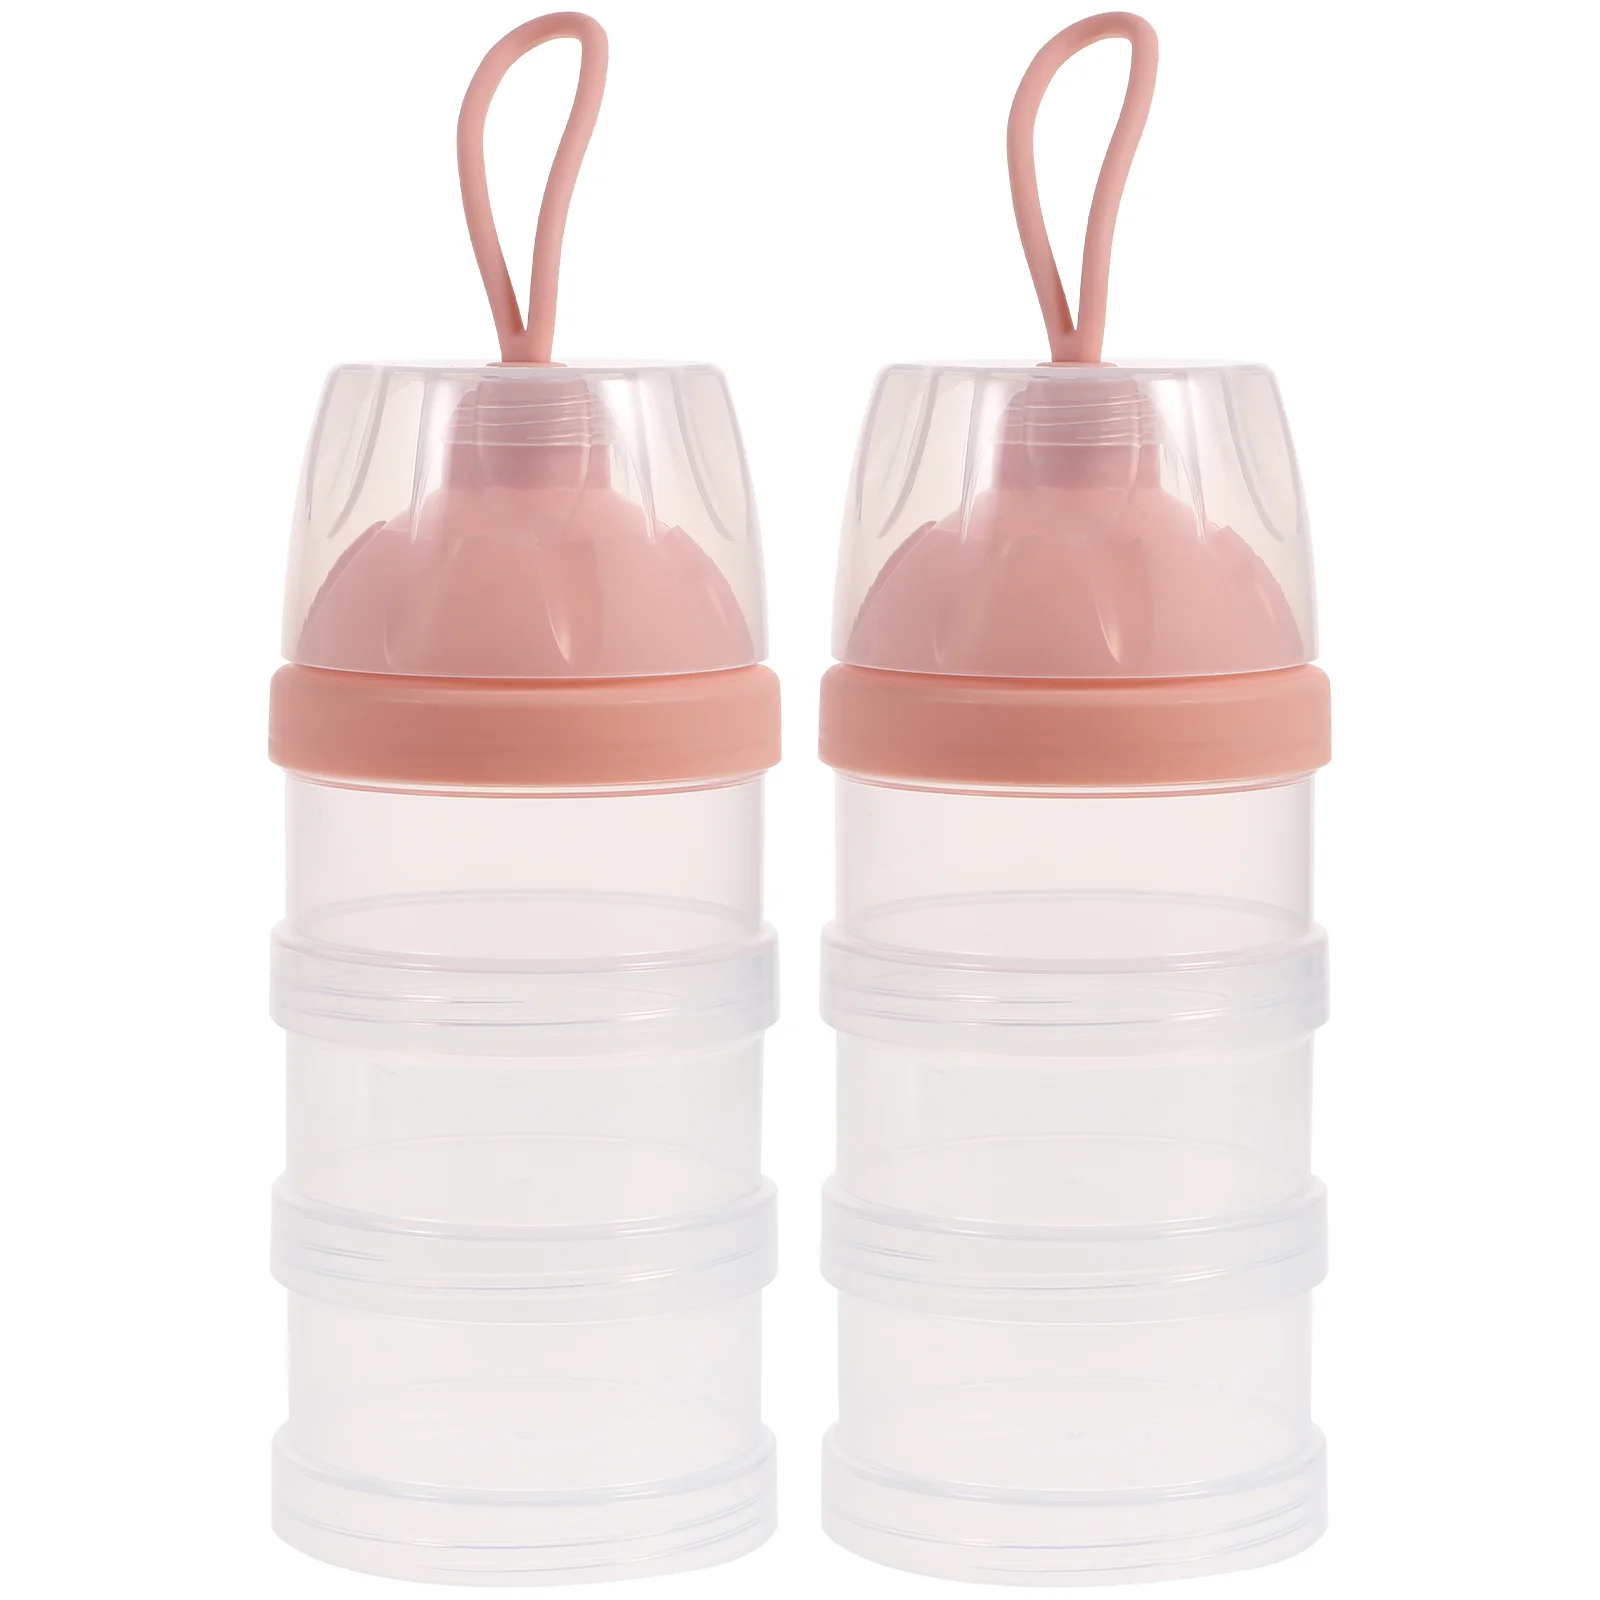 

2 Pcs Container Milk Powder Box Travel Snacks Containers Kids Dry Formula Dispenser Pp Baby Food